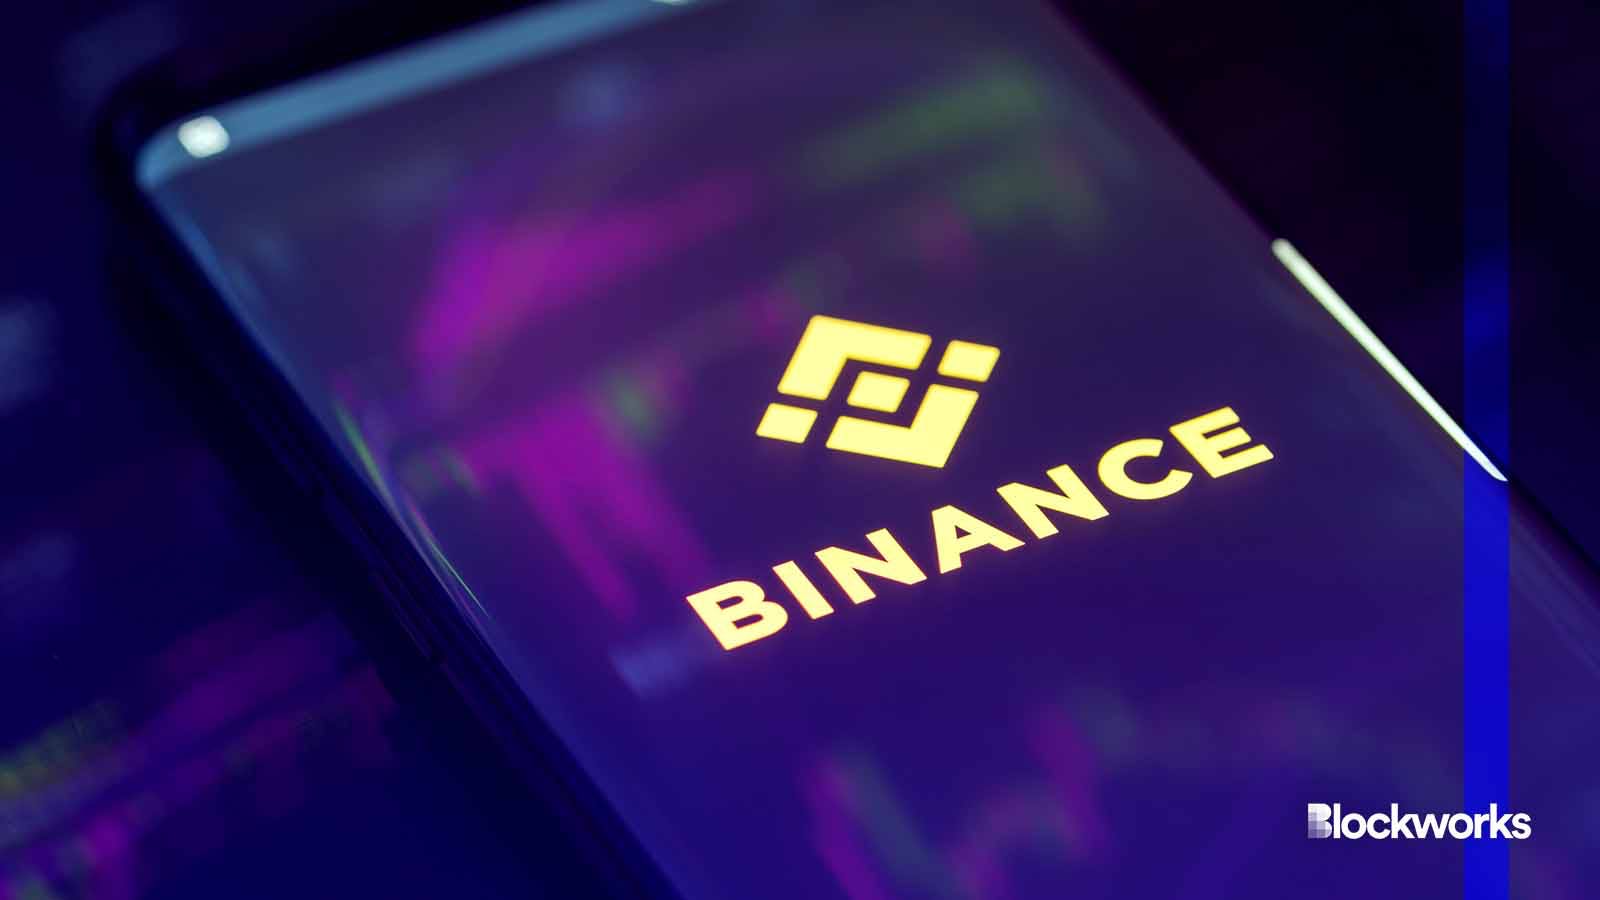 Binance gave VIP traders a heads up on $4B settlement: Bloomberg